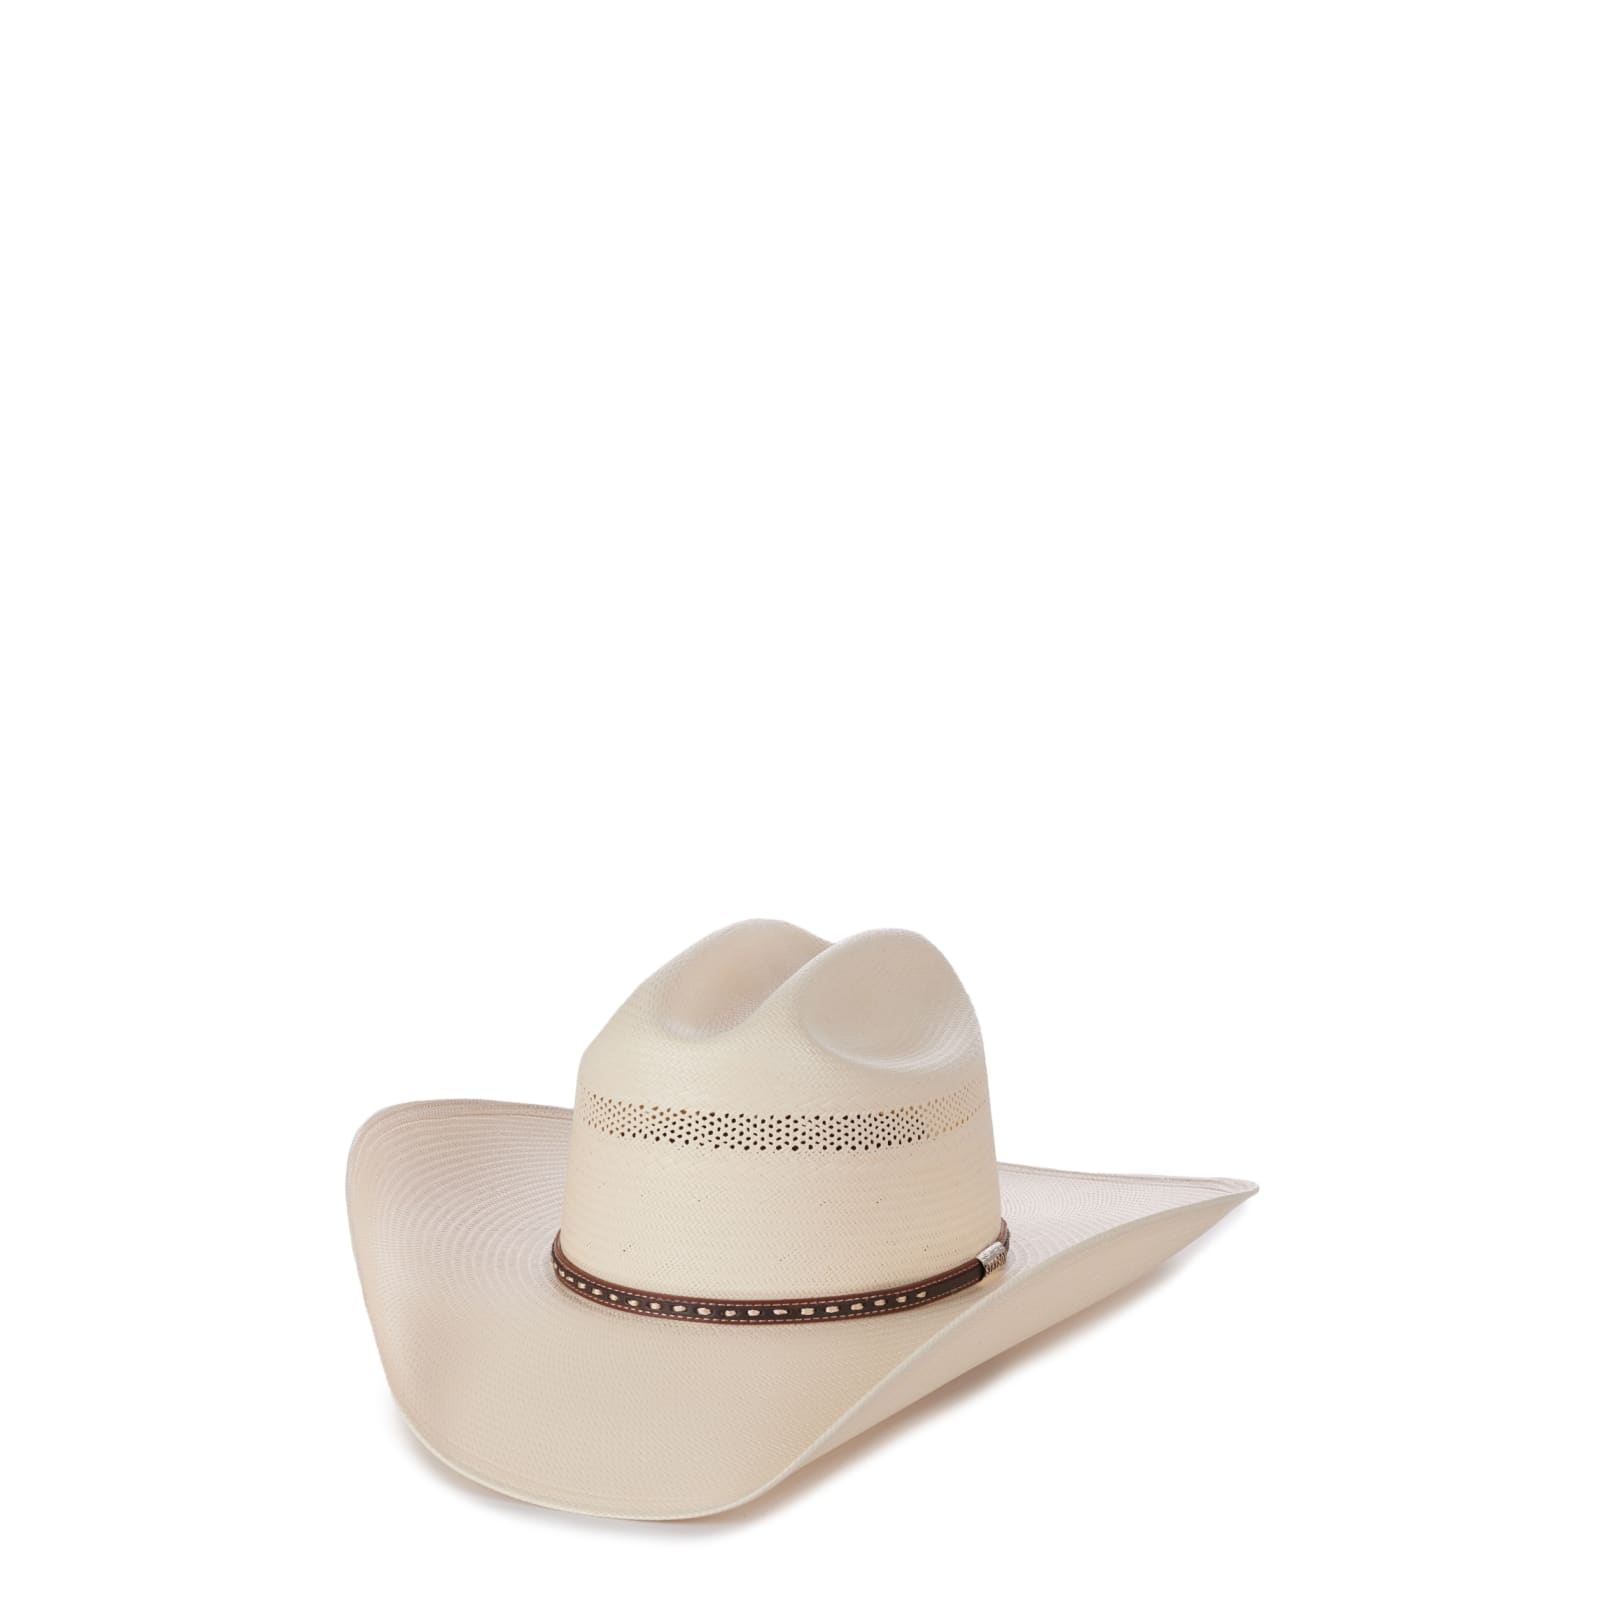 Stetson Crowley Natural Cattleman Straw Cowboy Hat available at Cavenders